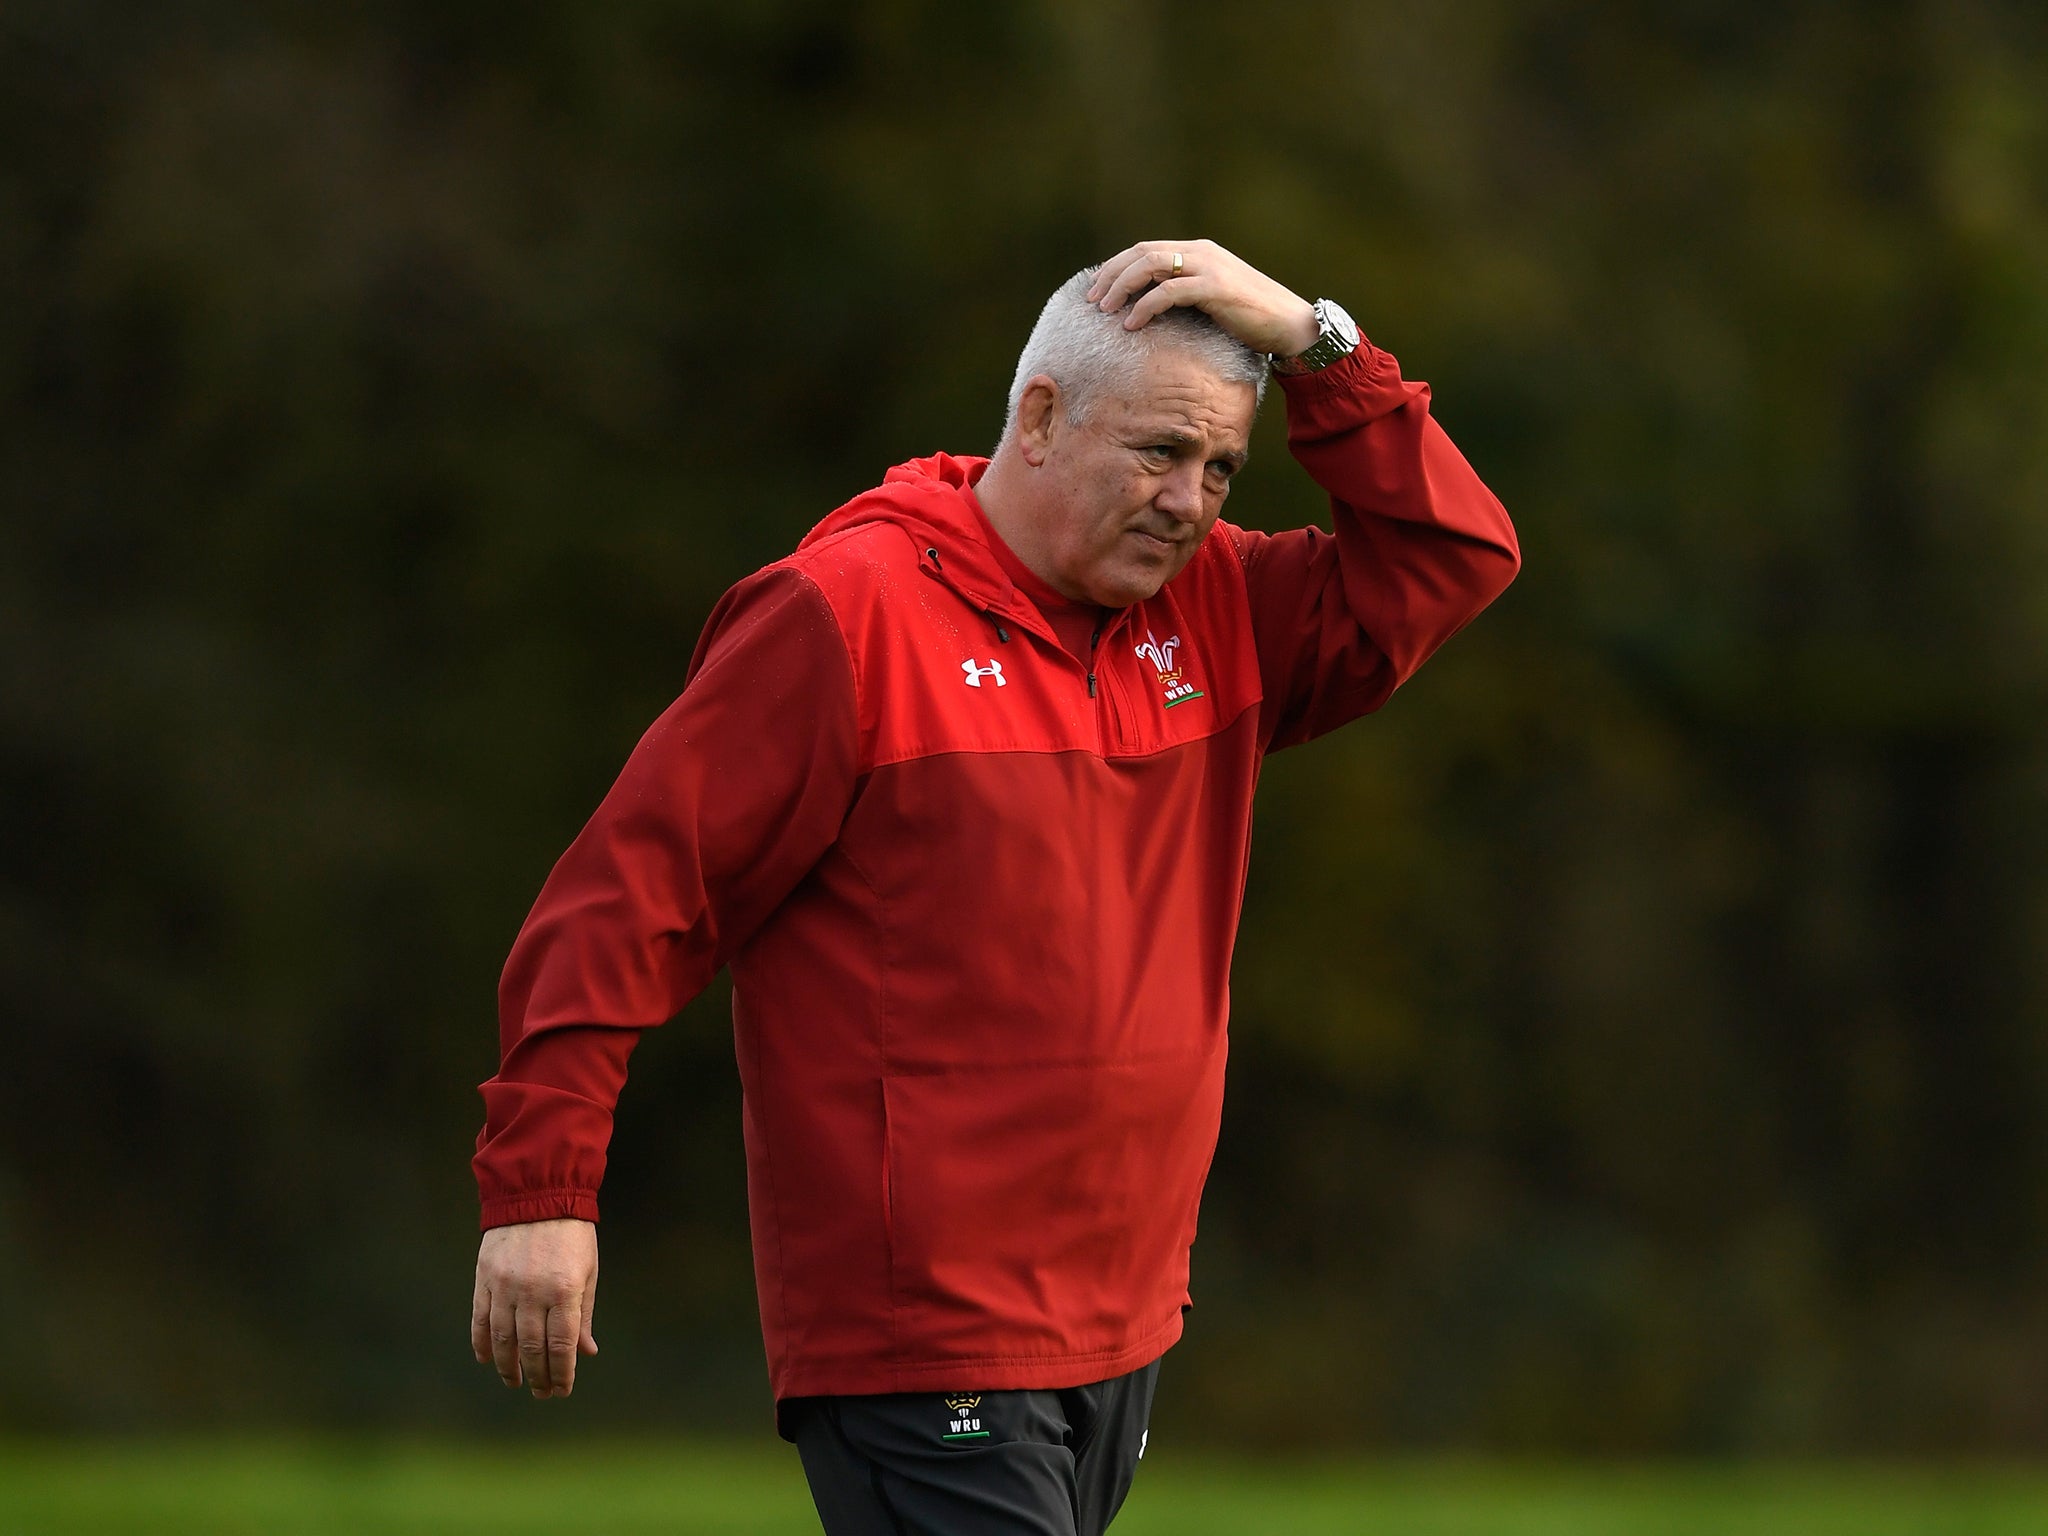 Warren Gatland has selected two ball-playing fly-halves in his midfield against Australia